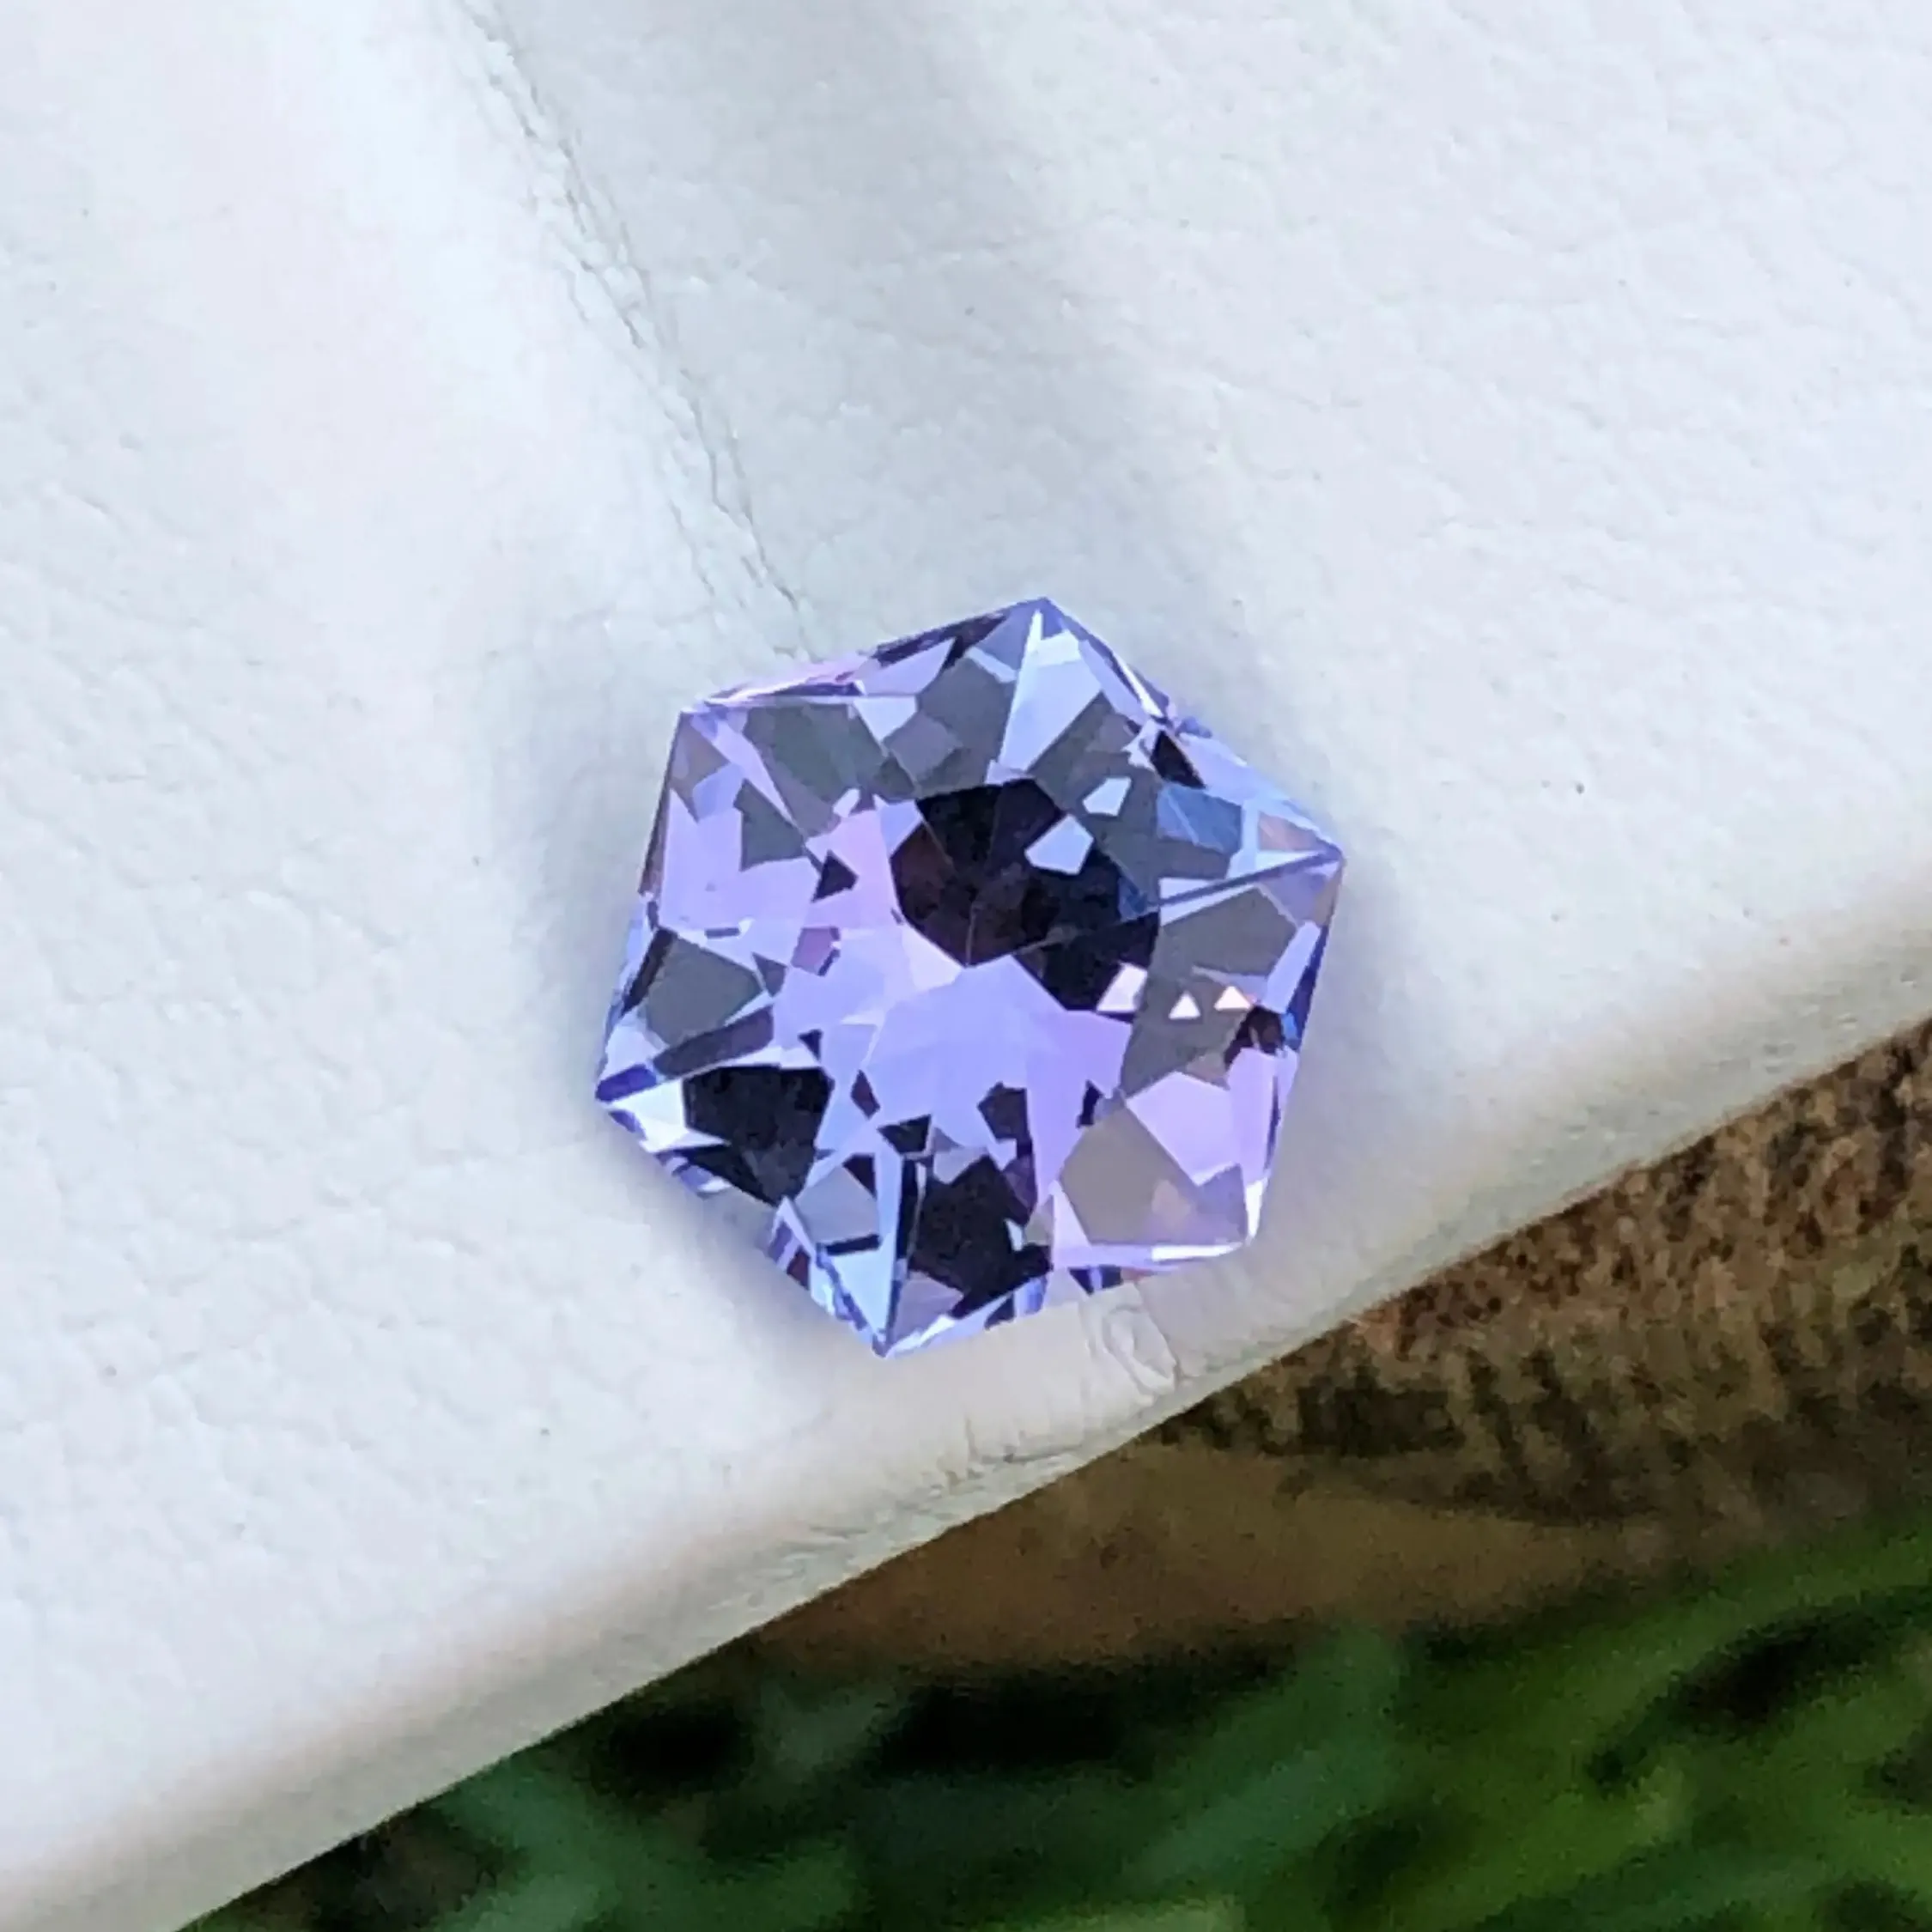 Top Grade High Quality Natural Tanzanite Hexagon Custom Design Loupe Clean 1.18 Ct Weight New Special Cut Amazing Look Gemstone